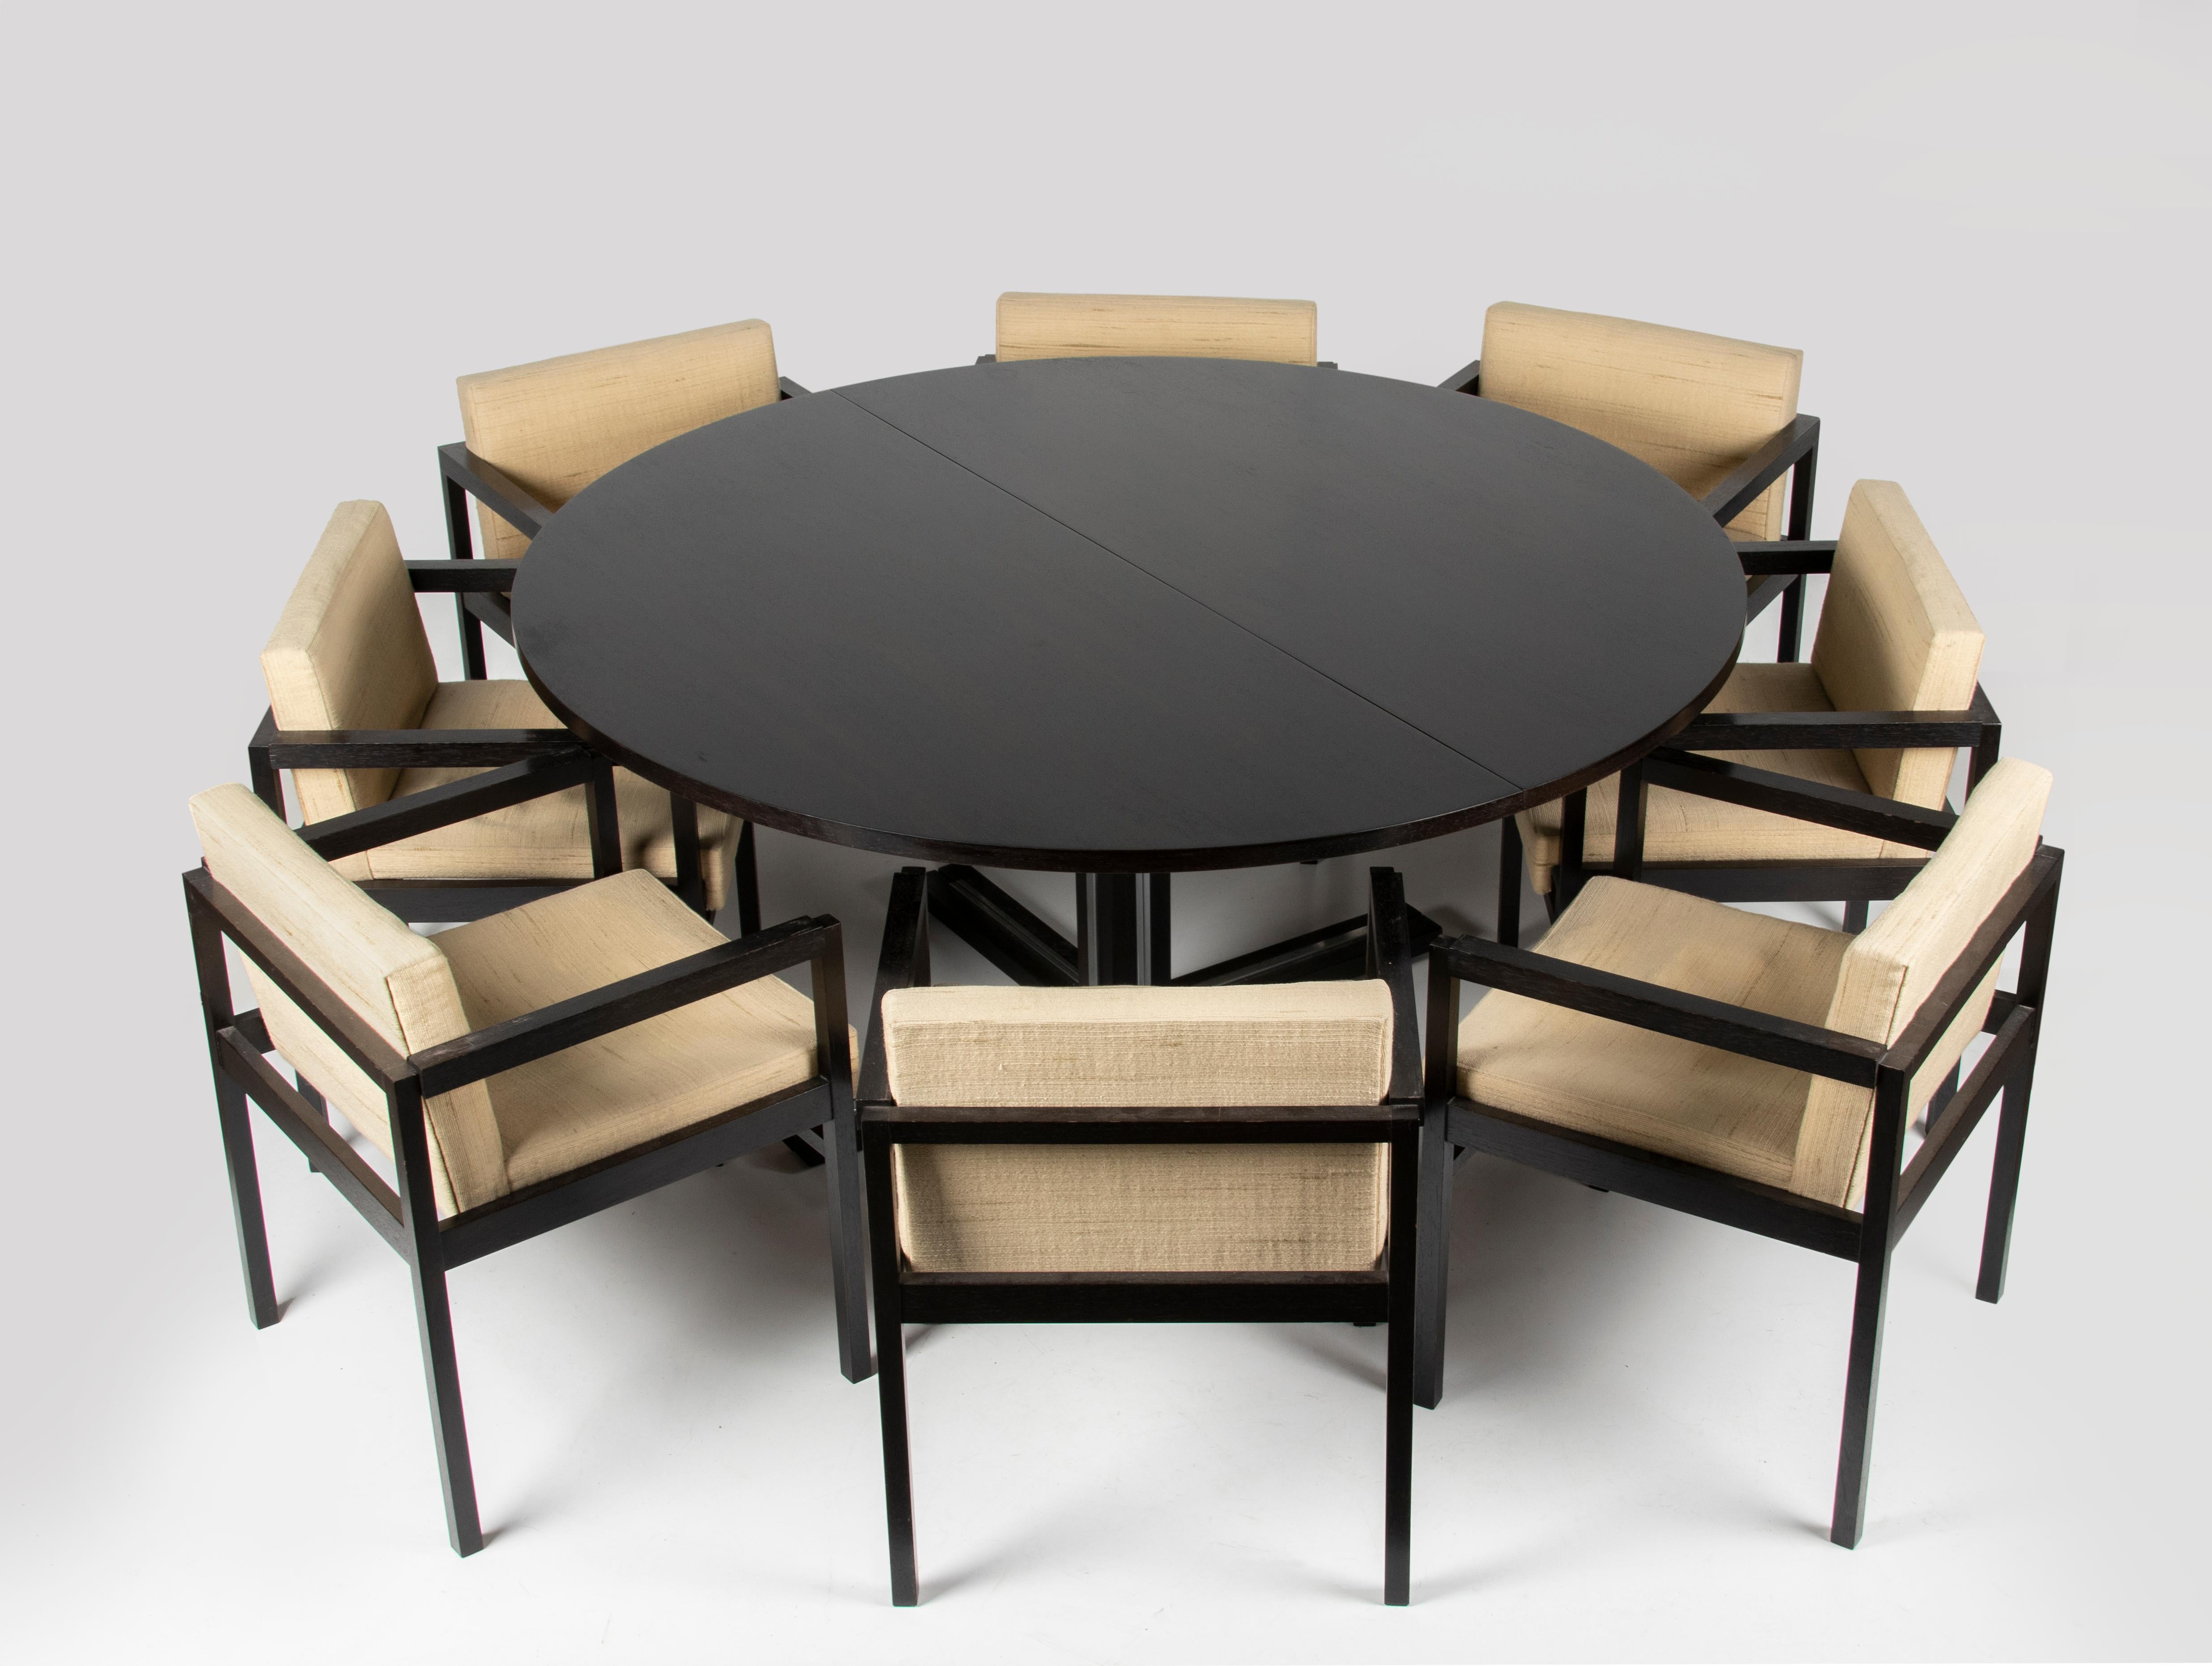 Beautiful large round wenge dining table with 8 matching chairs. The table can be extended with two original intermediate leaves.
If there are 6 chairs at the table, everyone is more spacious. The 8 chairs are especially useful when the table is